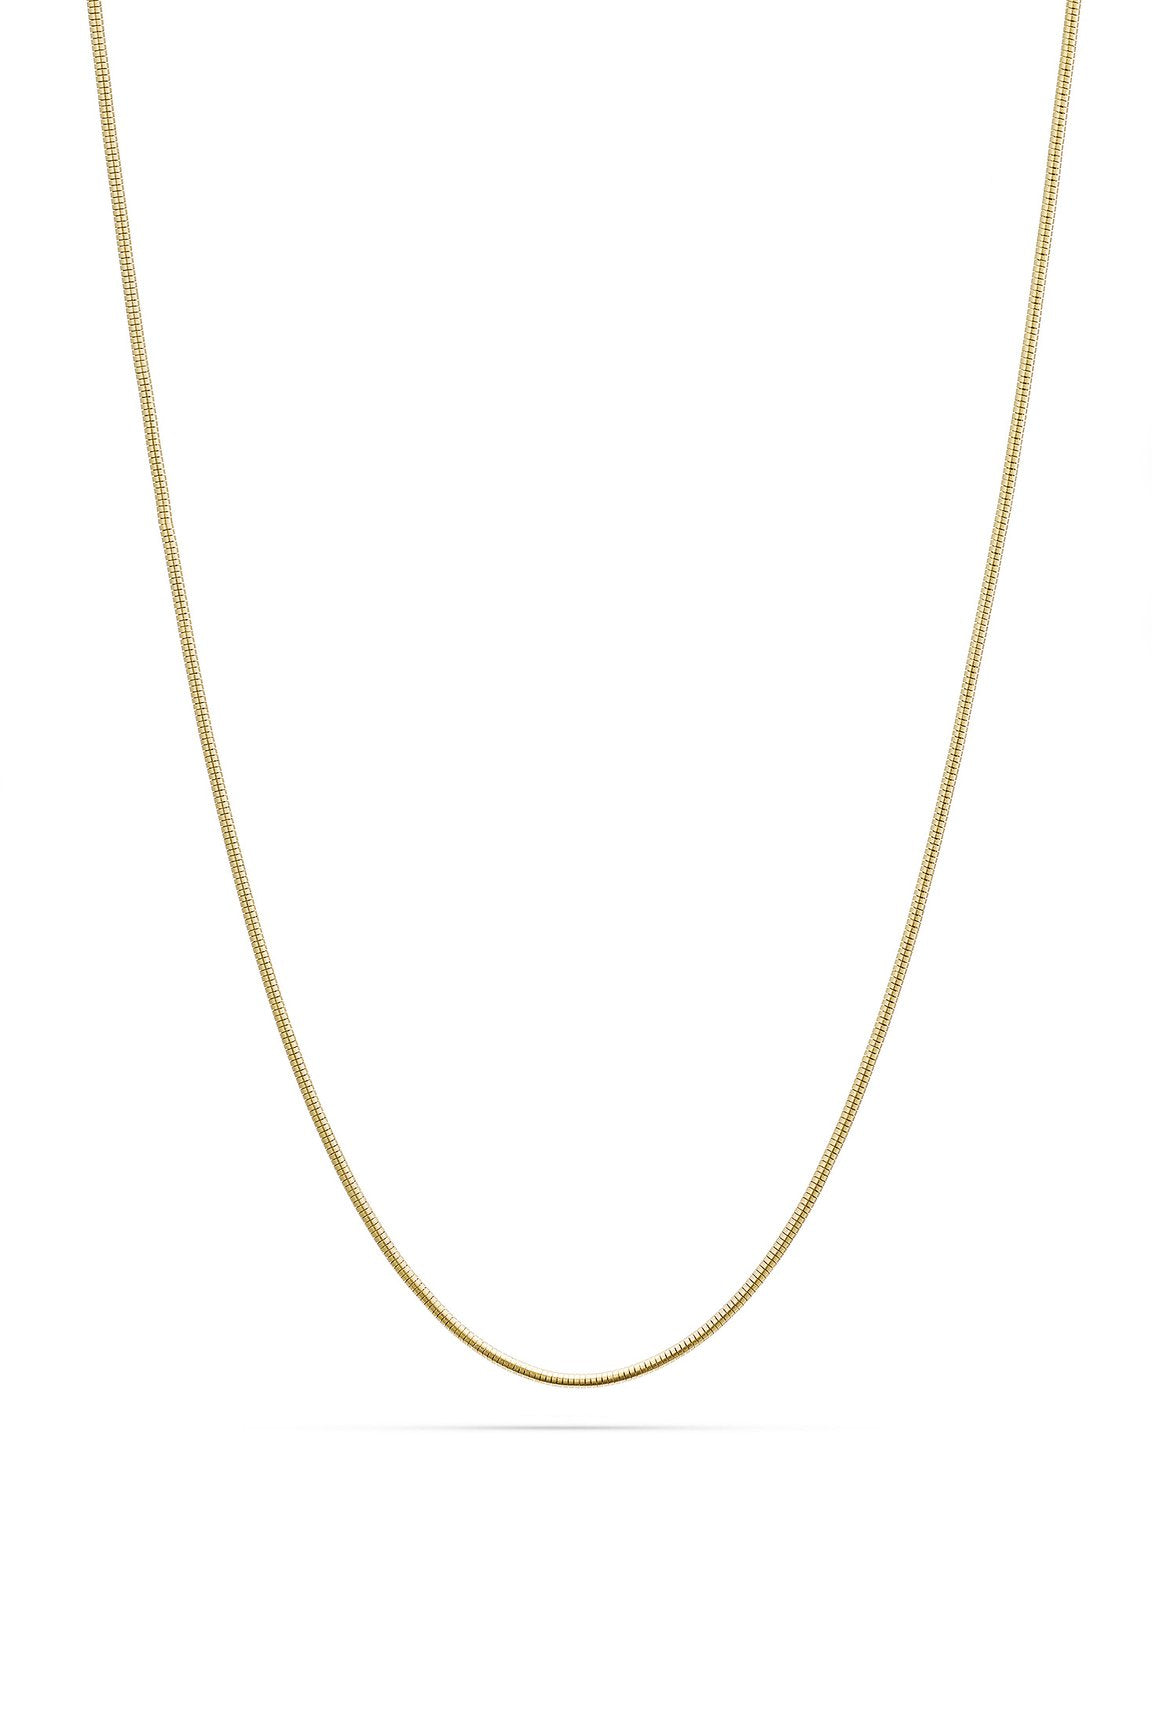 DOLCE NECKLACE IN GOLD